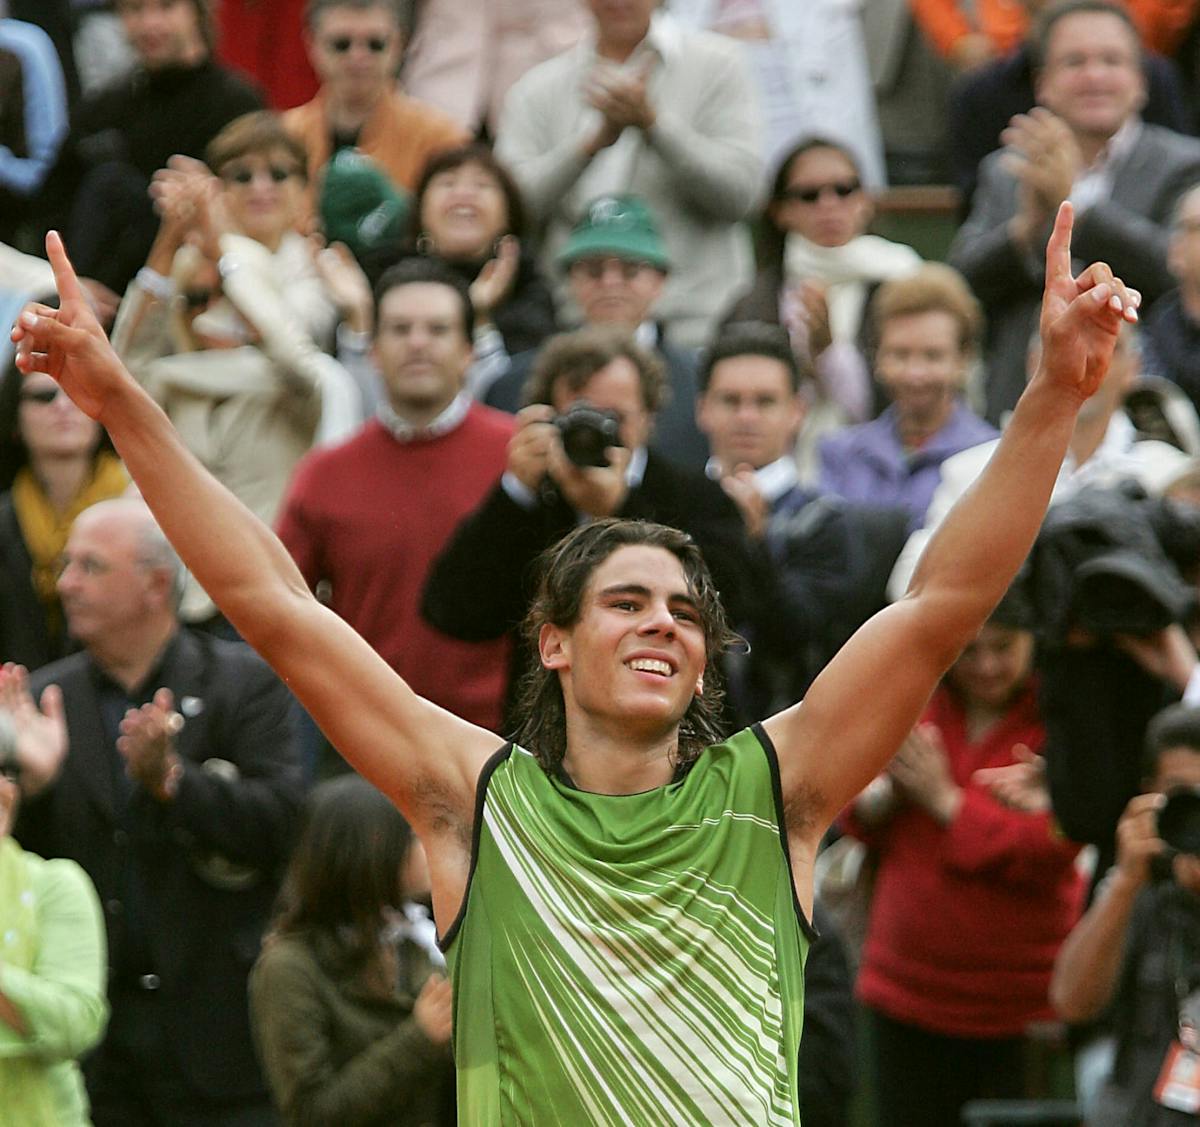 Rafael Nadal's Shirt from 2005 French Open Win Could Sell for $100K at Auction